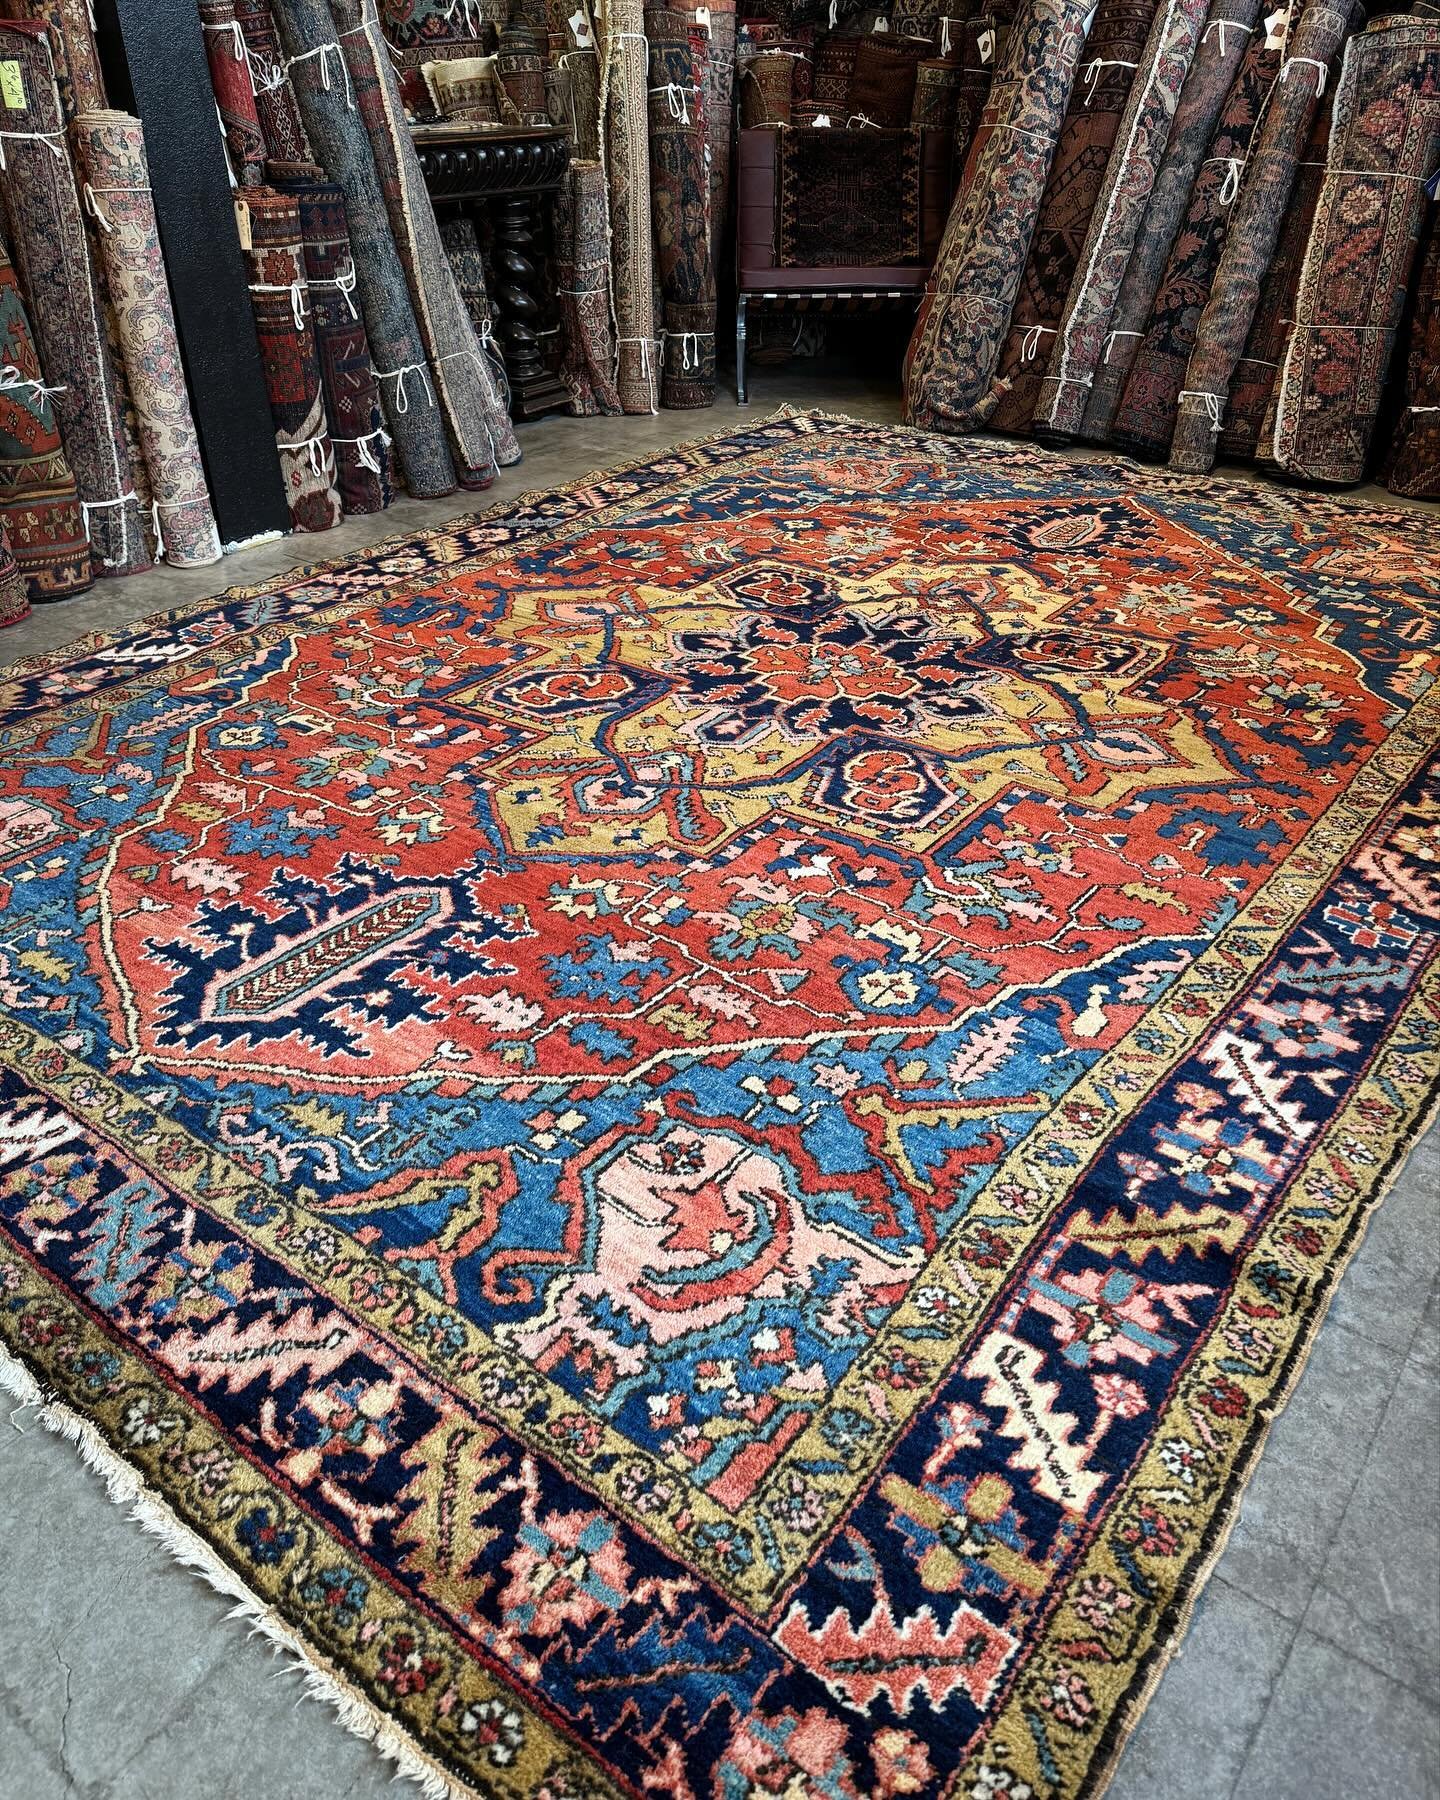 Extraordinary antique rugs are what we do. Getting them to our customers in sparkling clean condition is a matter of pride for us. You will see and feel the difference. This whimsical rug from East Azerbaijan province in NW Iran dates to around 1910.